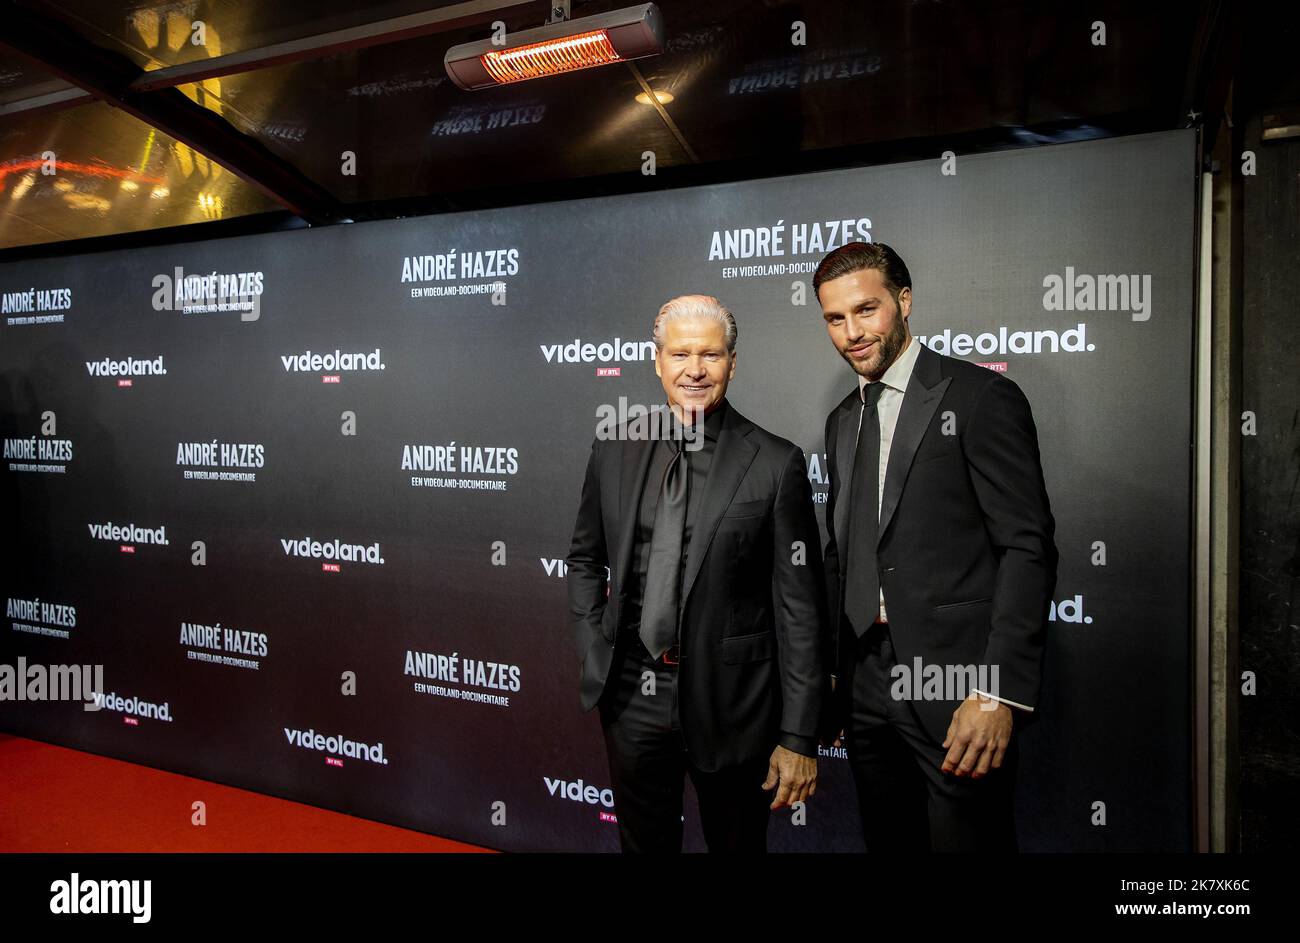 2022-10-19 19:48:05 AMSTERDAM - Dries and Donny Roelvink on the red carpet  of the premiere of the five-part documentary series Andre Hazes. The  documentary focuses on the addiction problems that Andre Hazes